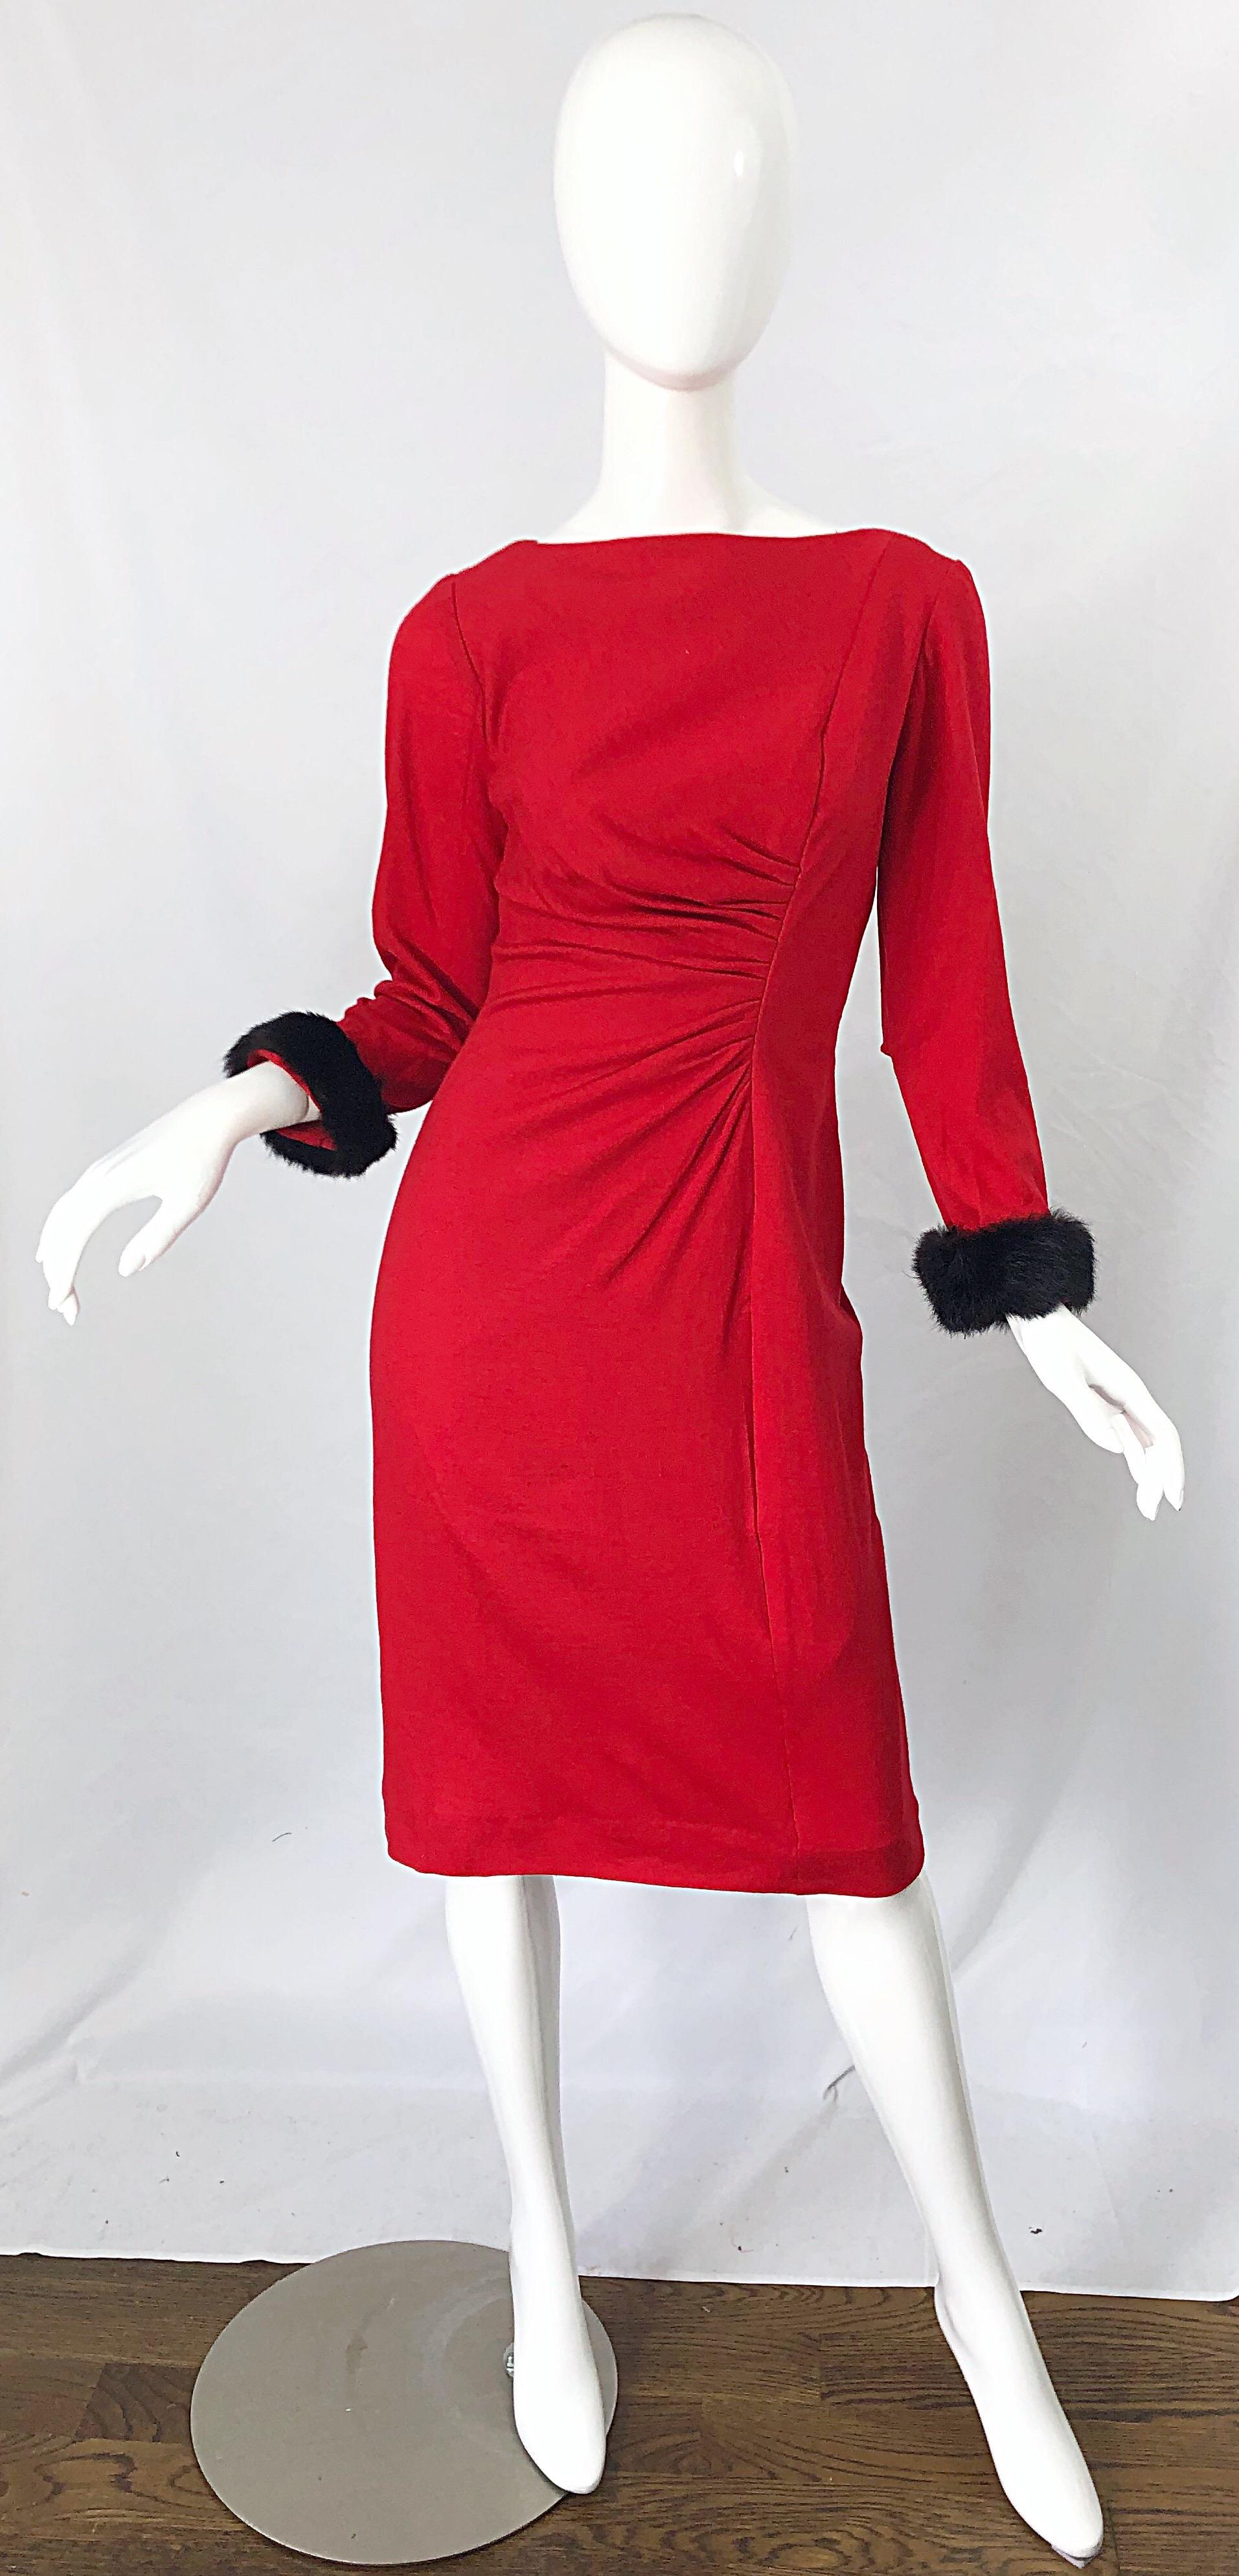 Beautiful 1950s lipstick red wool and mink fur cuffs. Features a soft lightweight wool. Flattering gathers at the waist. Black mink fur at each sleeve cuff. Full metal zipper up the back with hook-and-eye closure. Fully lined. Very well made with